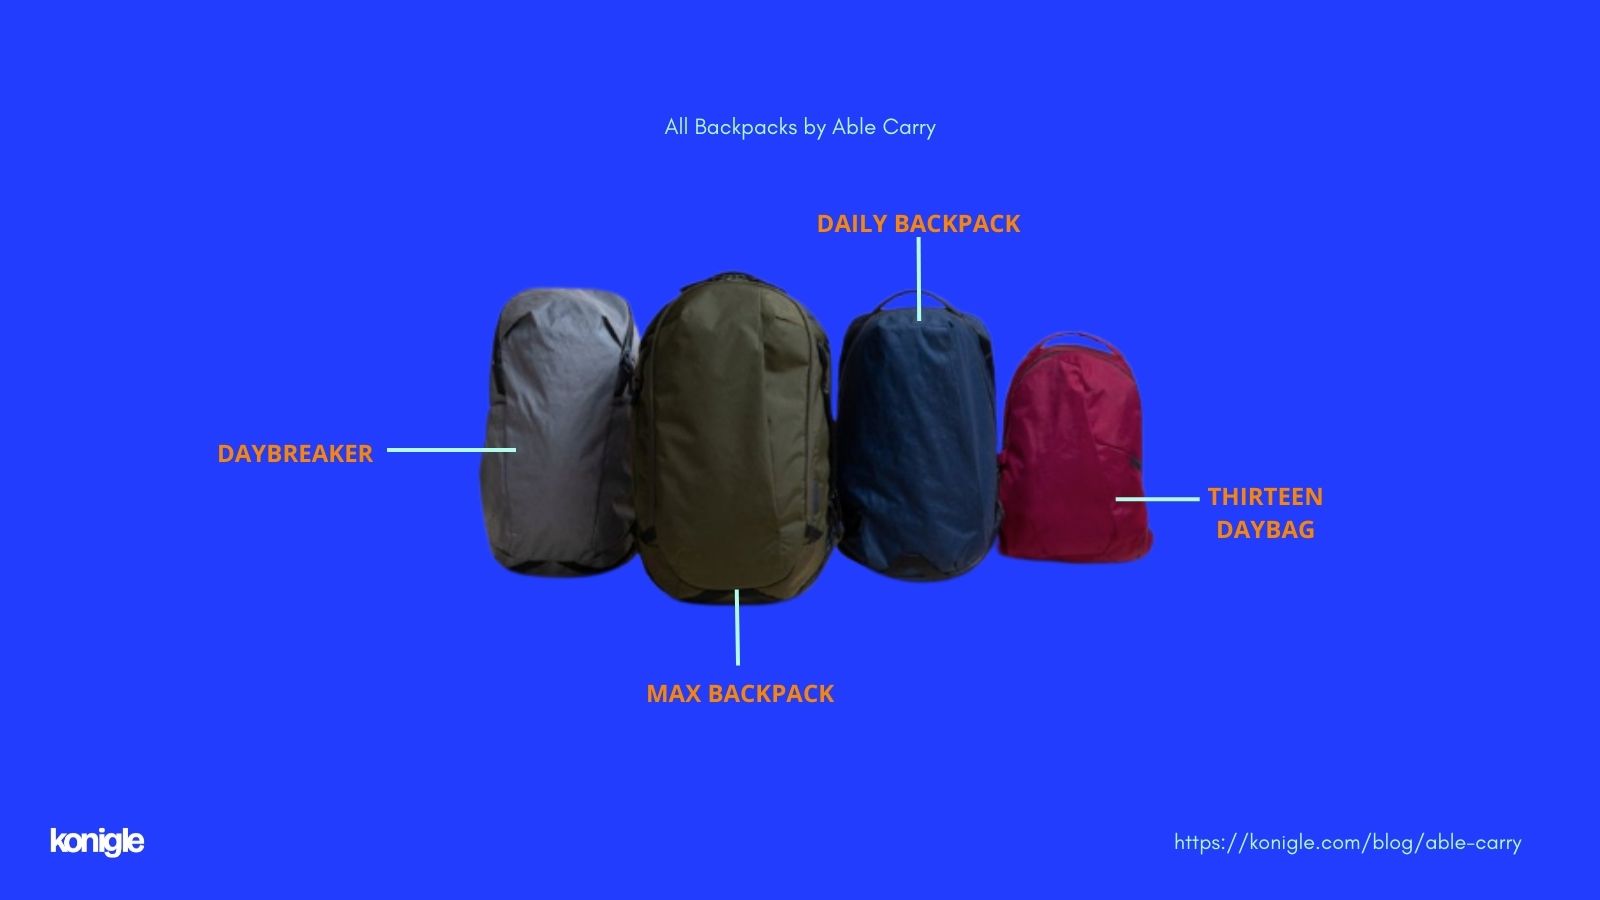 All backpacks by Able Carry